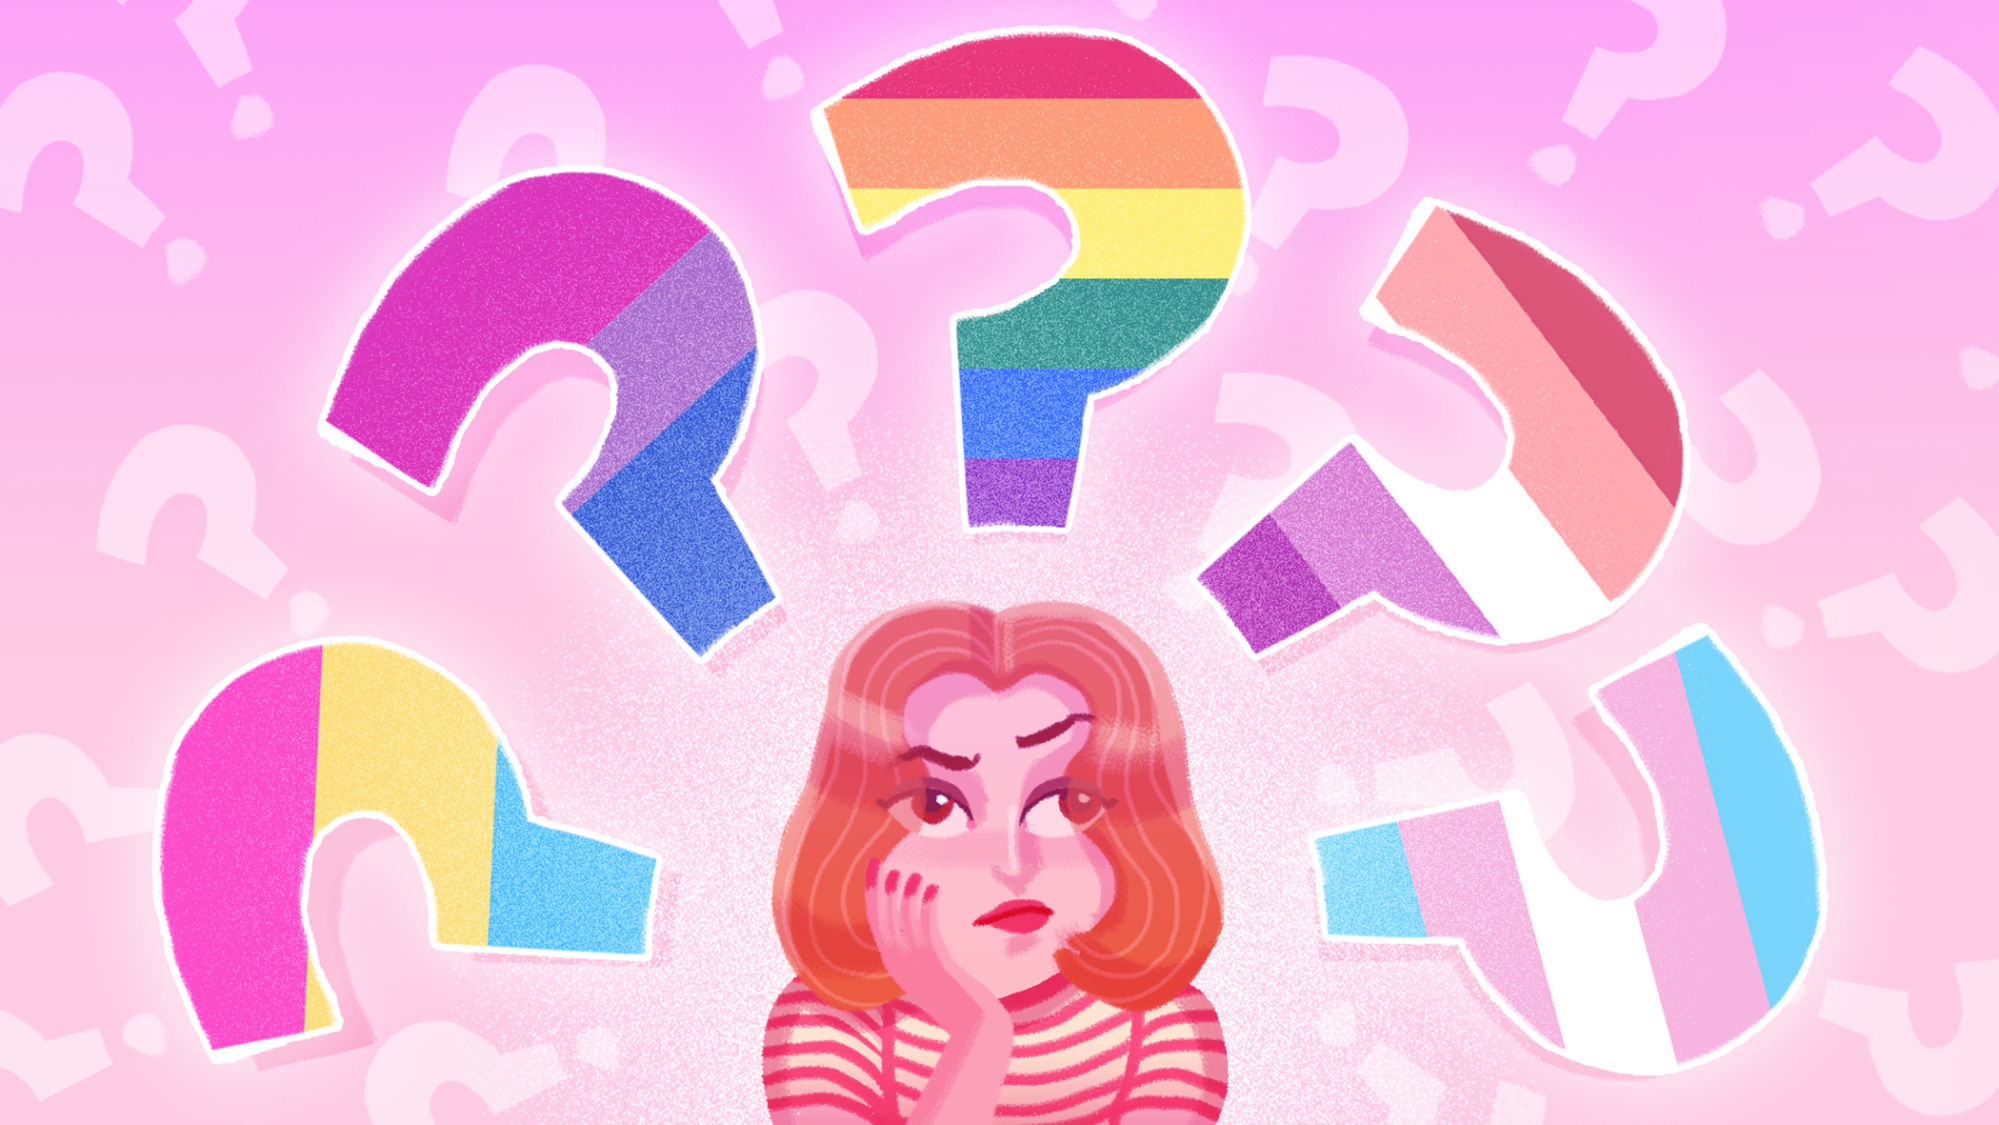 person with hand on face looking up at question marks of various pride flags